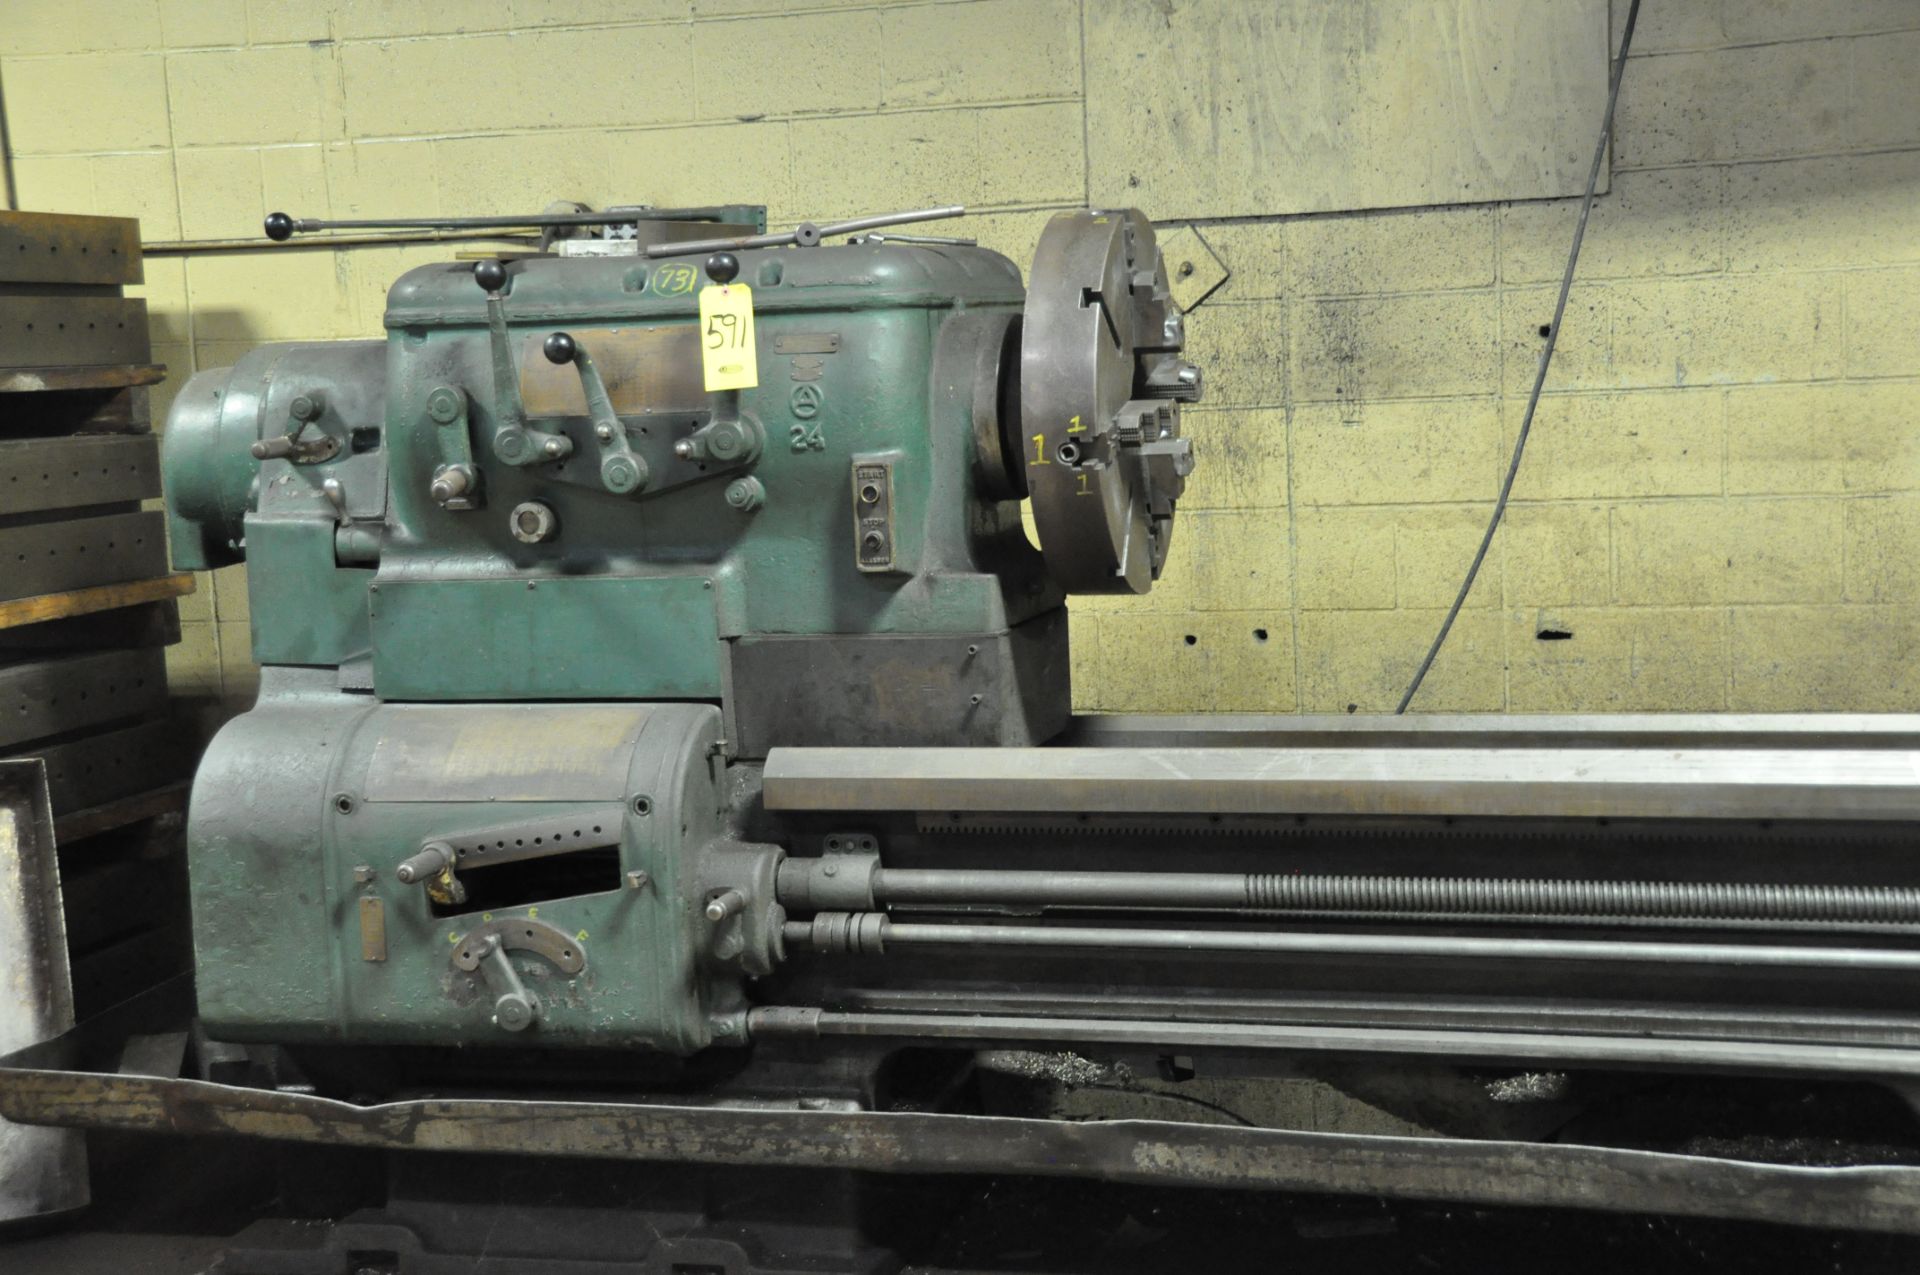 44" X 16' AXELSON LATHE, SN. 1043, MODEL 24, 6-555 RPM, 44" SWING OVER WAYS…